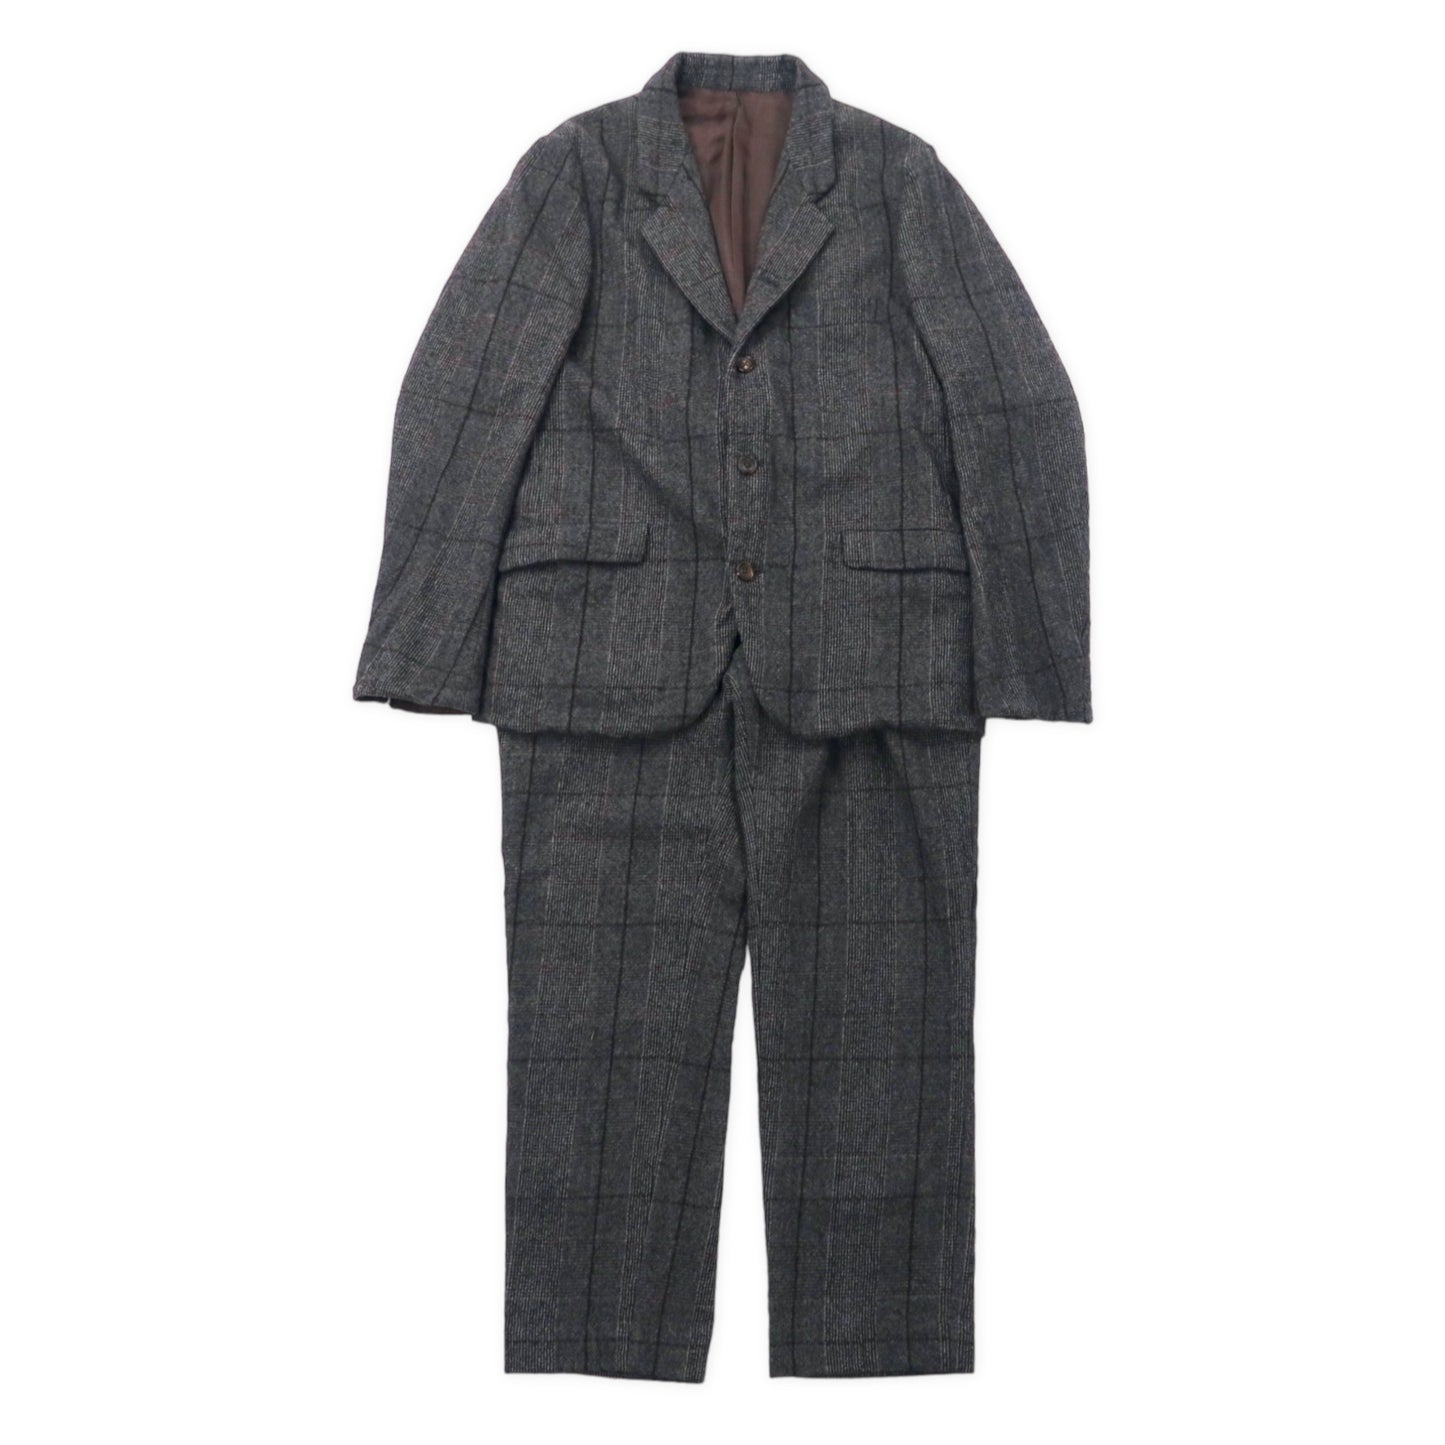 08 SIRCUS Tweed Suit Setup 3/50 Gray CHECKED Wool Cashmere Mixed 